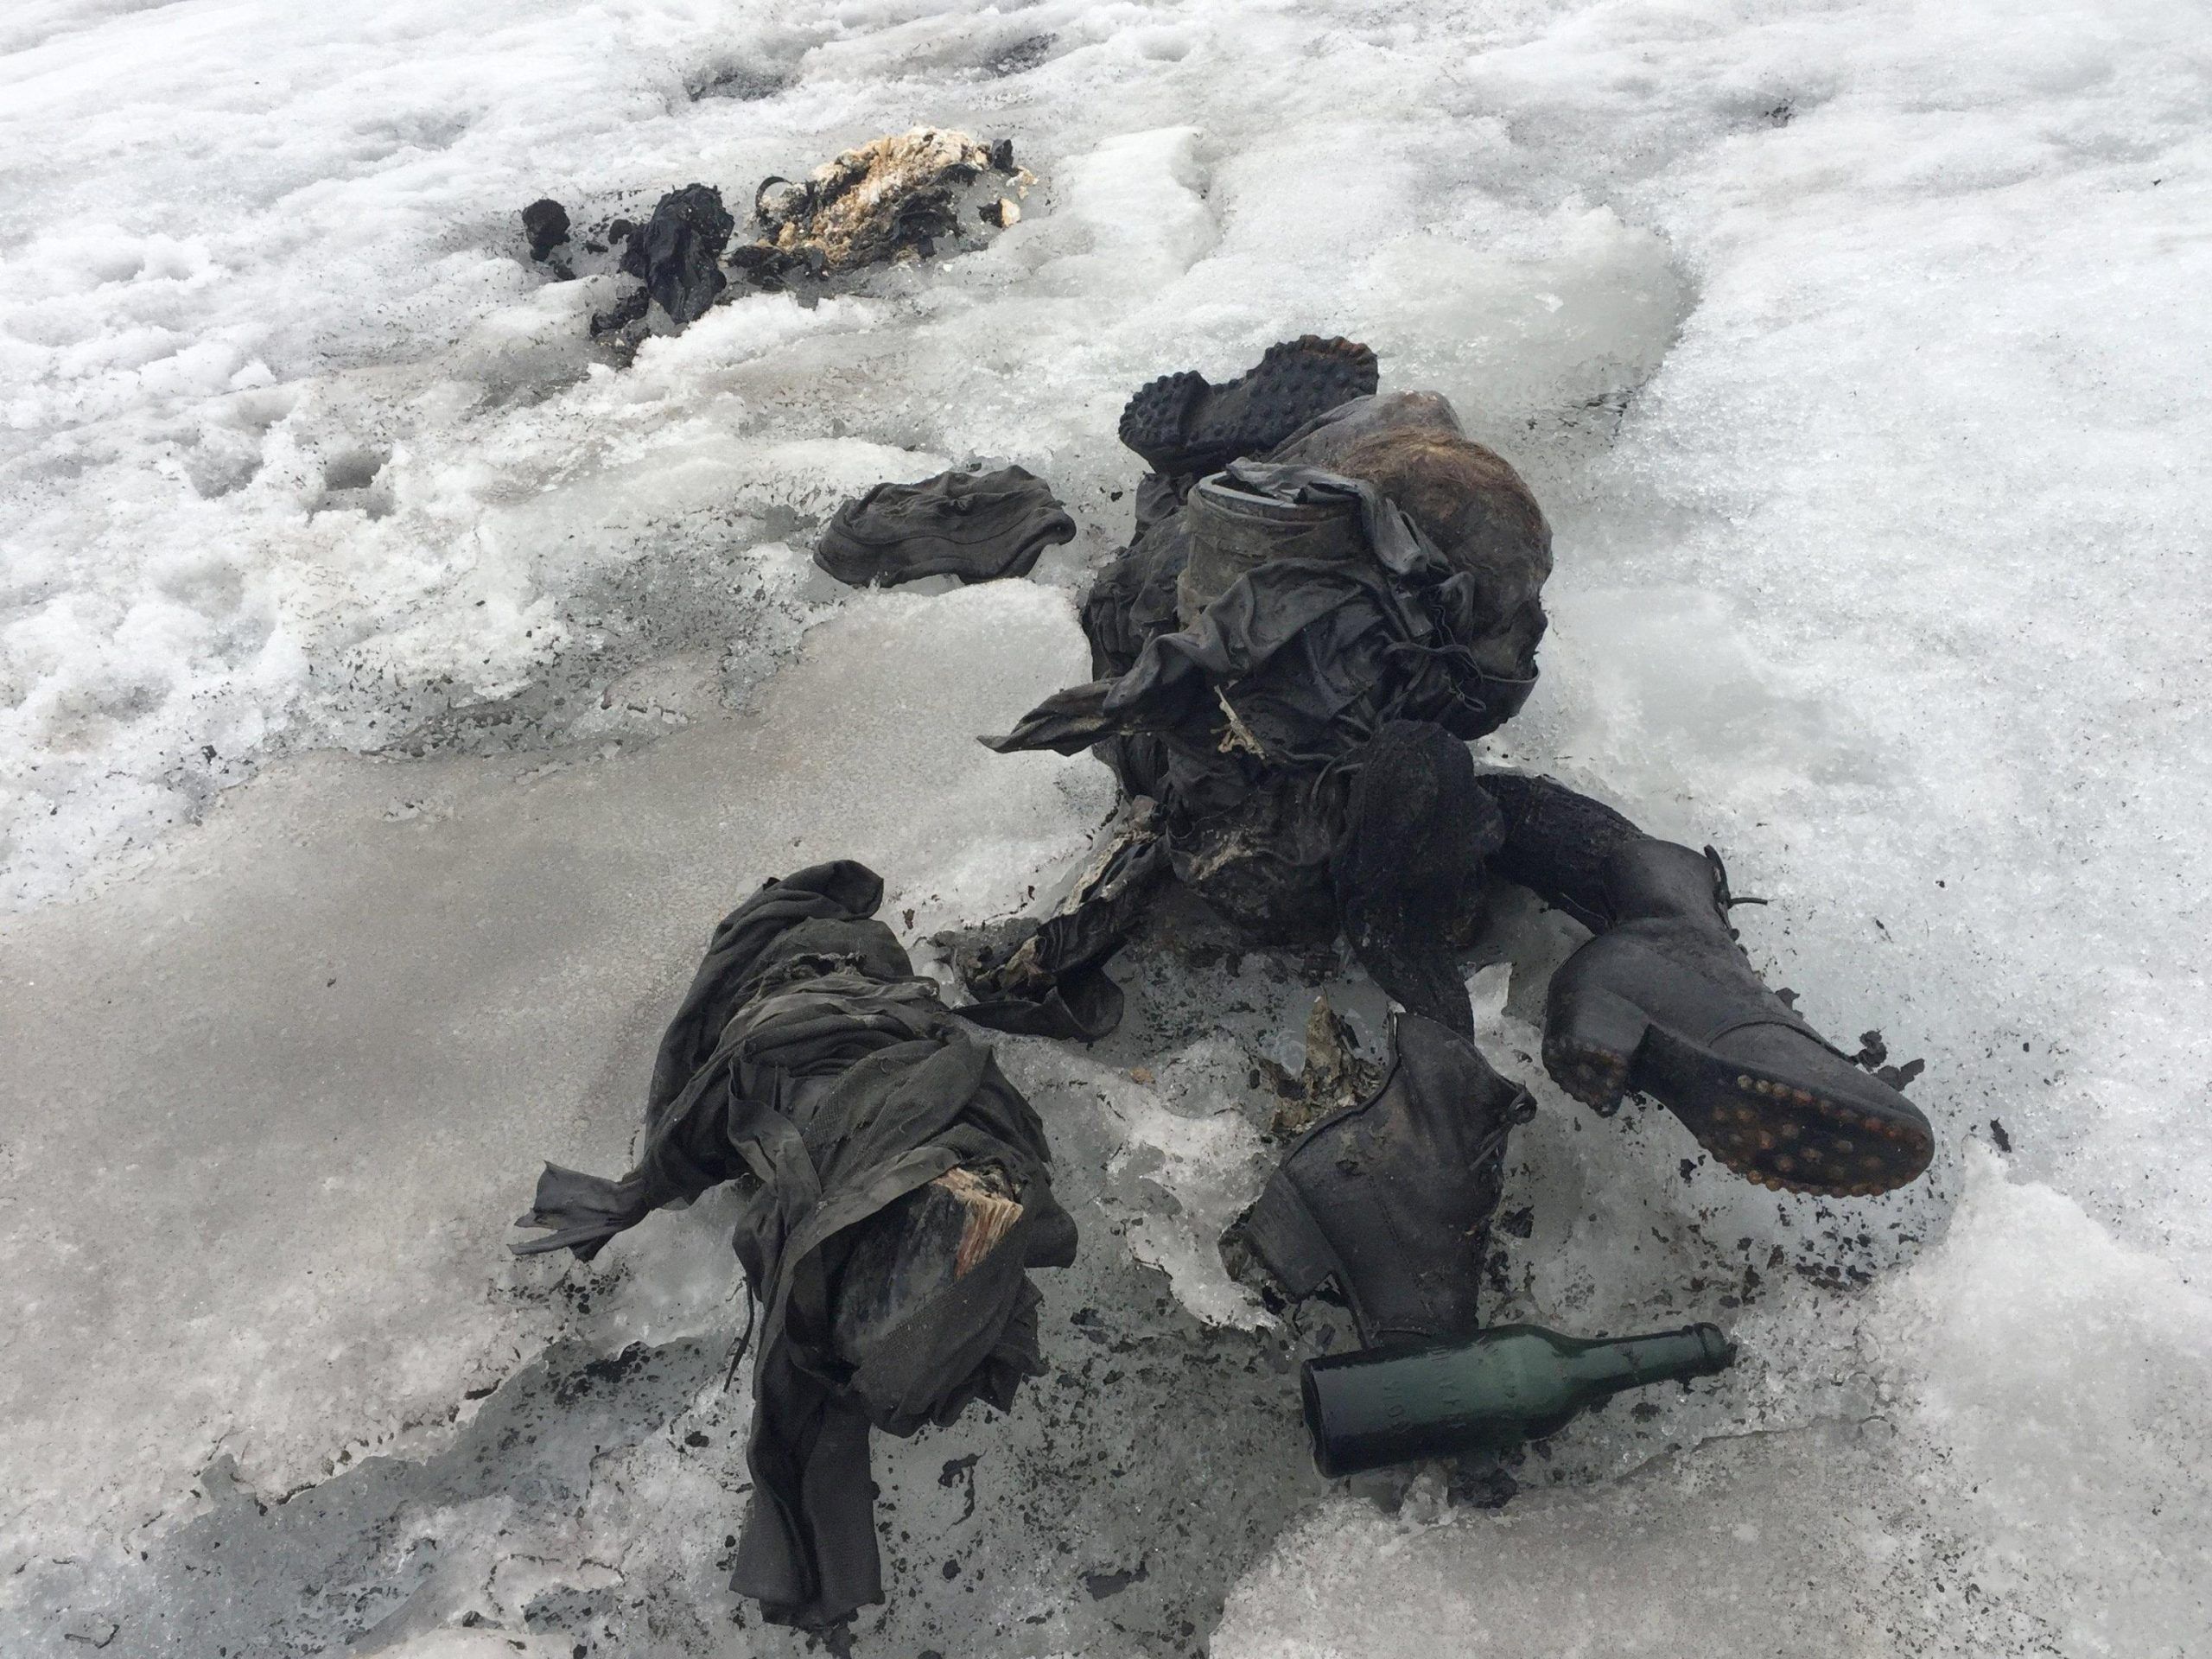 Bodies of couple found after being buried in ice for decades